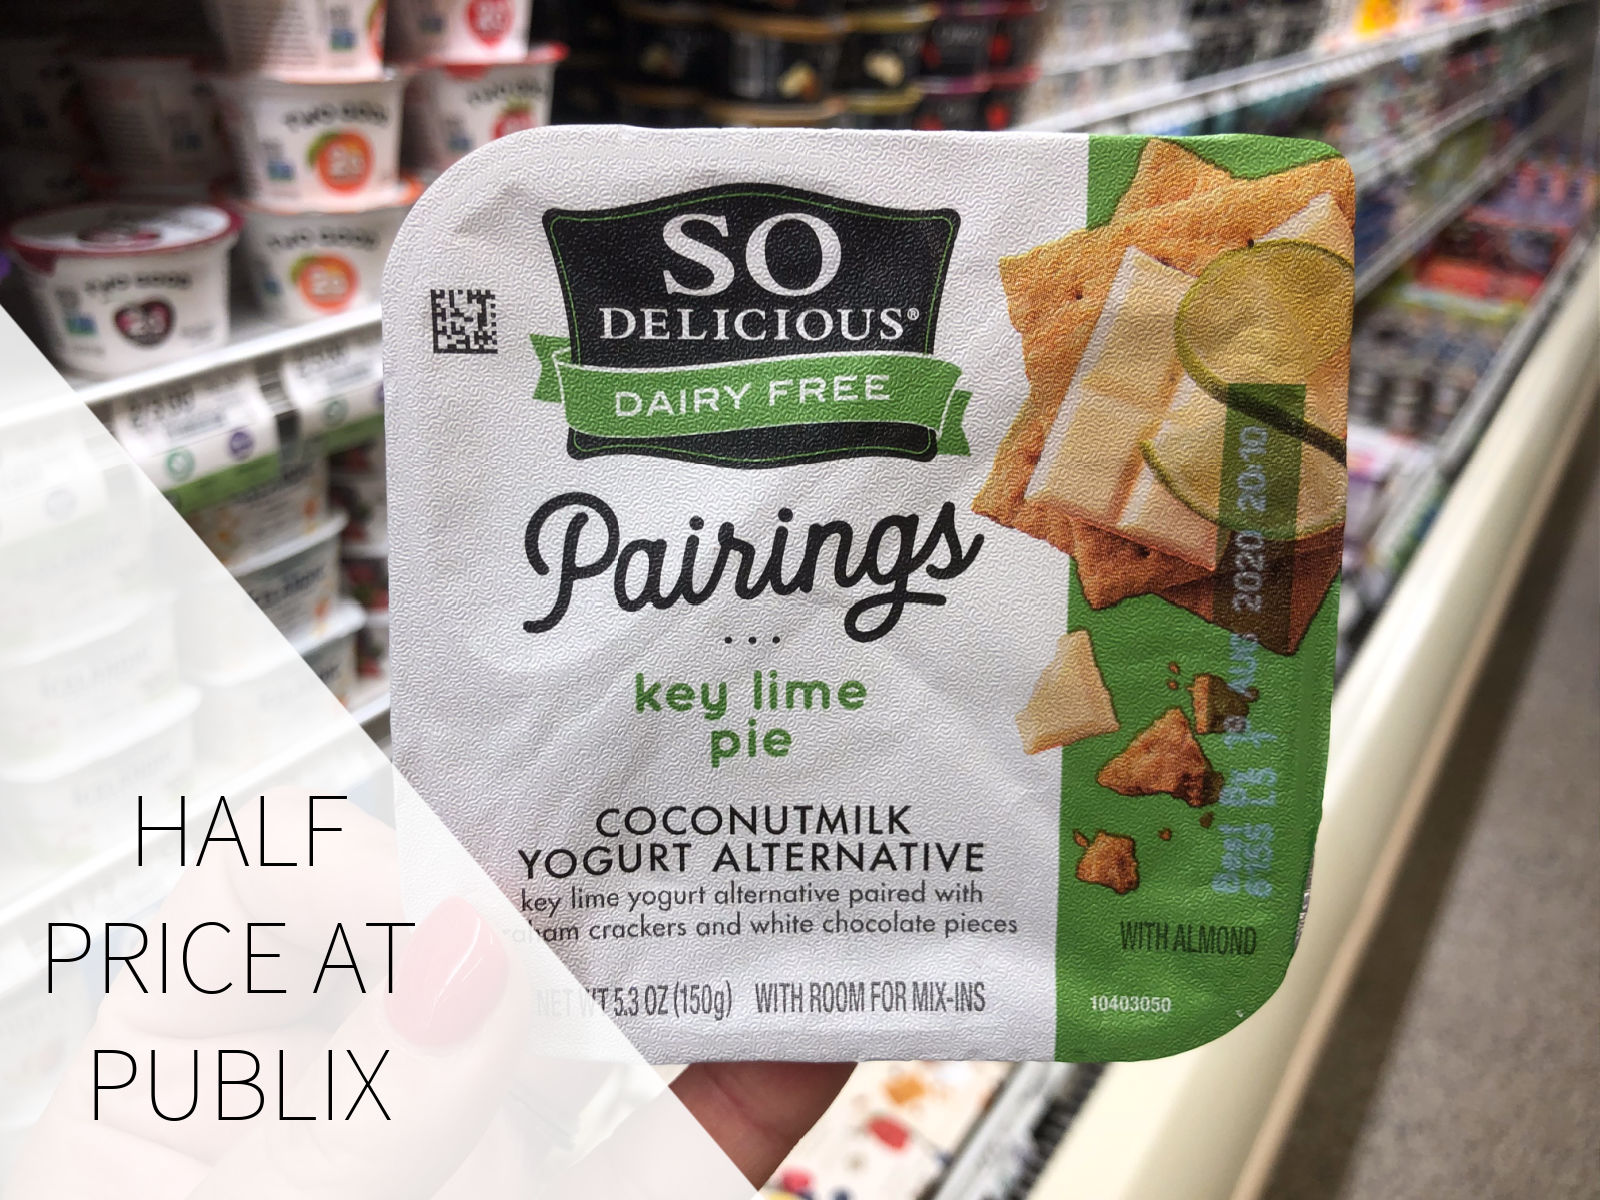 So Delicious Pairings As Low As 14¢ At Publix on I Heart Publix 2